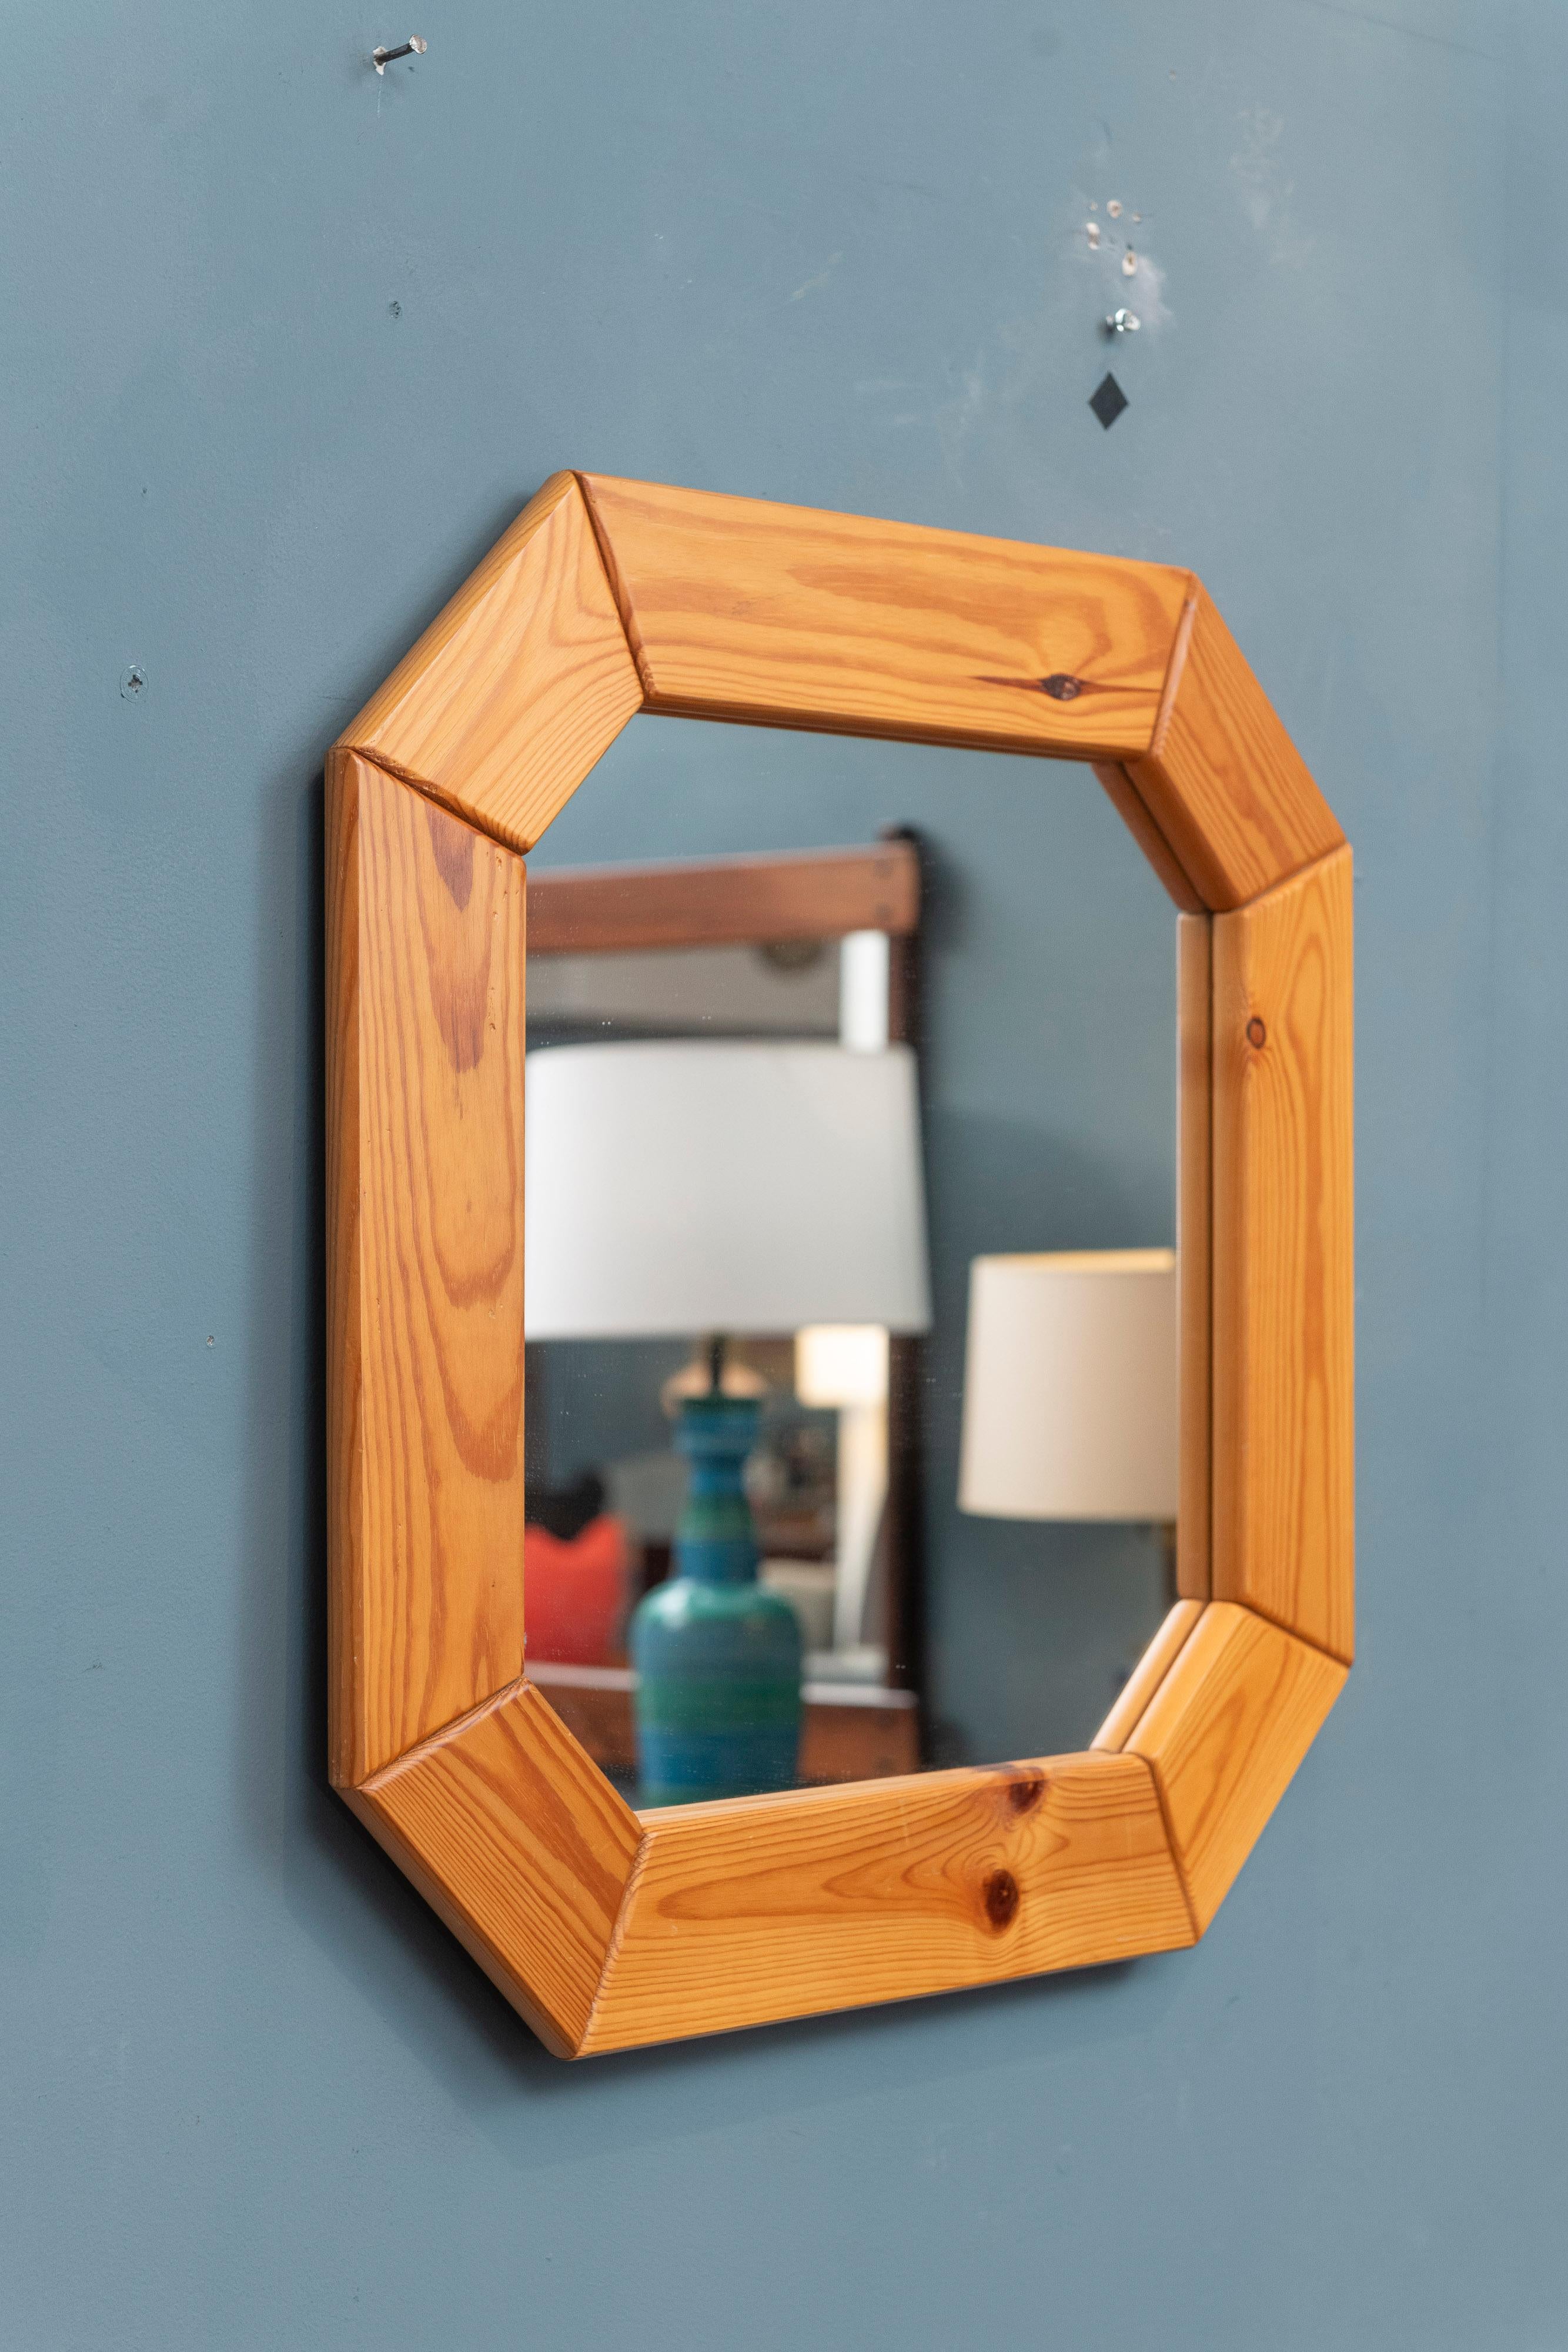 Scandinavian modern knotty pine wall mirror. Interesting octagonal shape that is super simple yet great. In overall very good vintage condition, ready to install and enjoy.